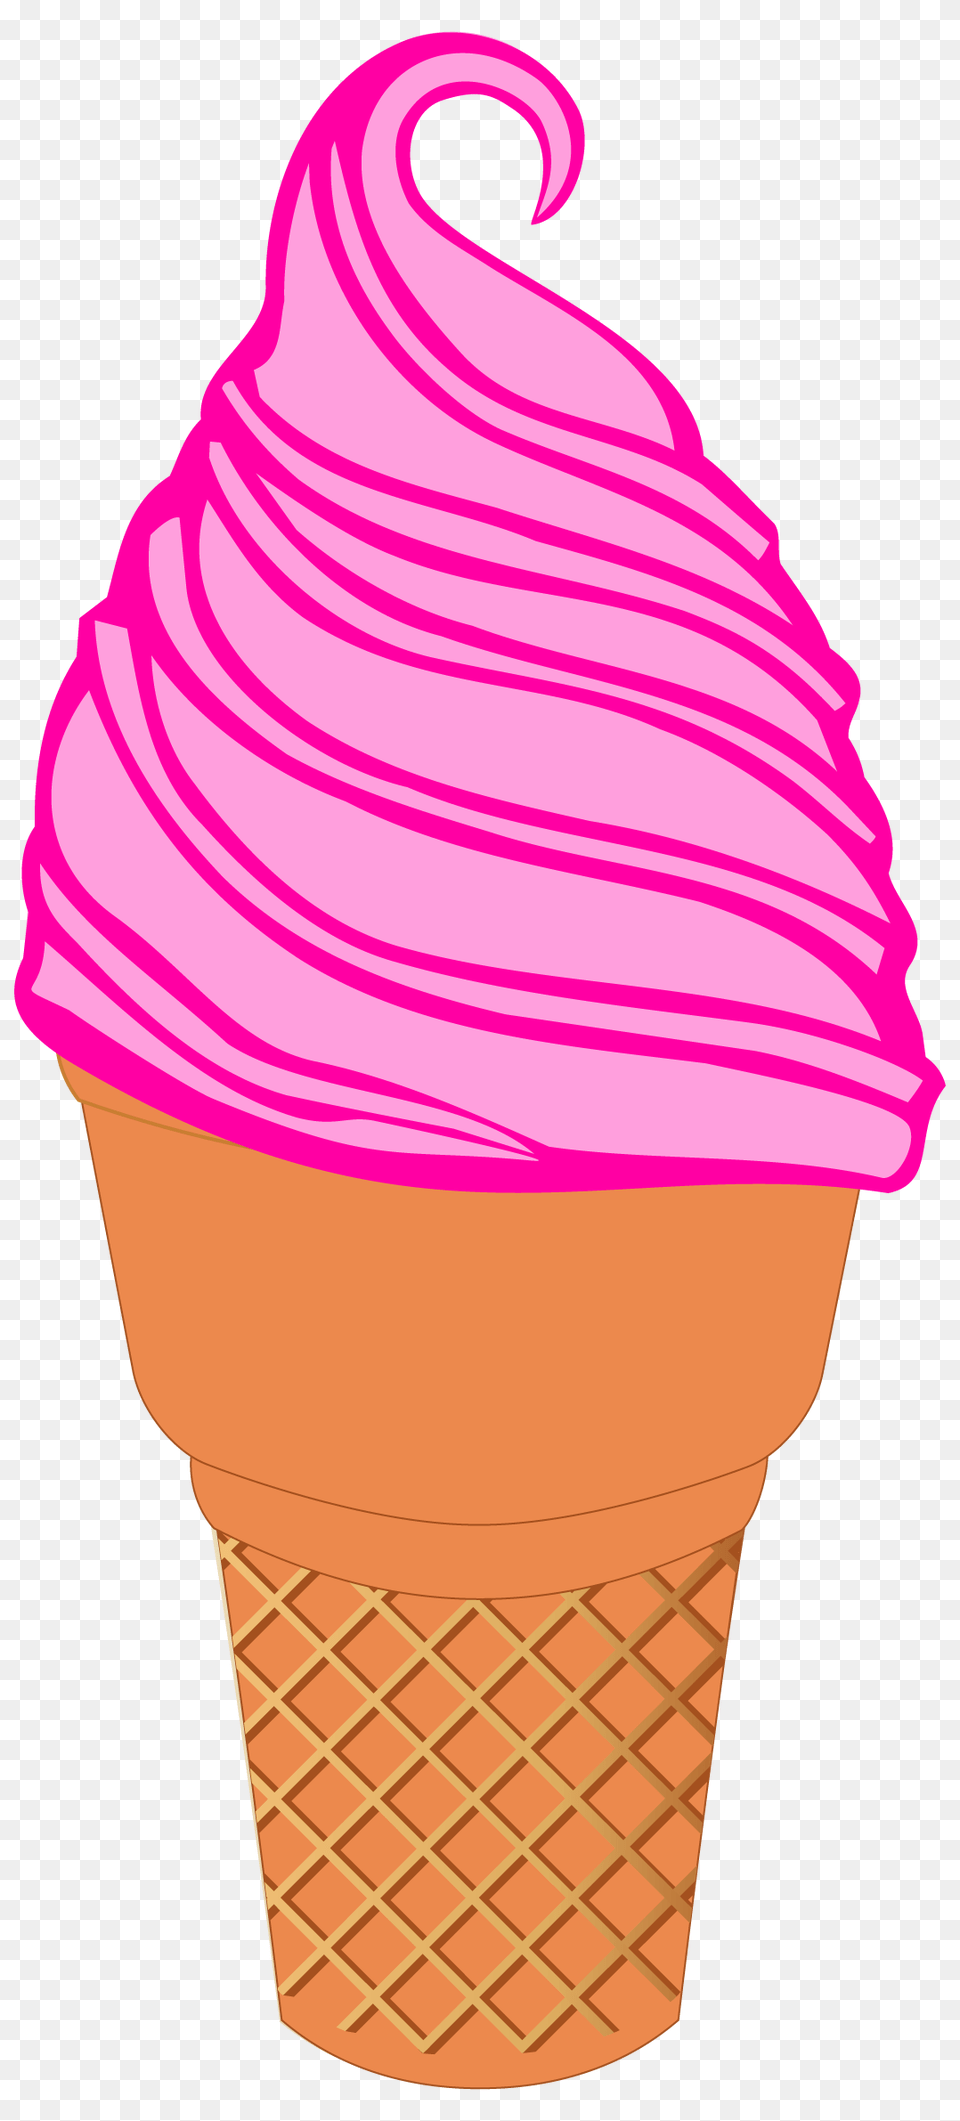 Icecream Clipart Download On Webstockreview, Cream, Dessert, Food, Ice Cream Png Image